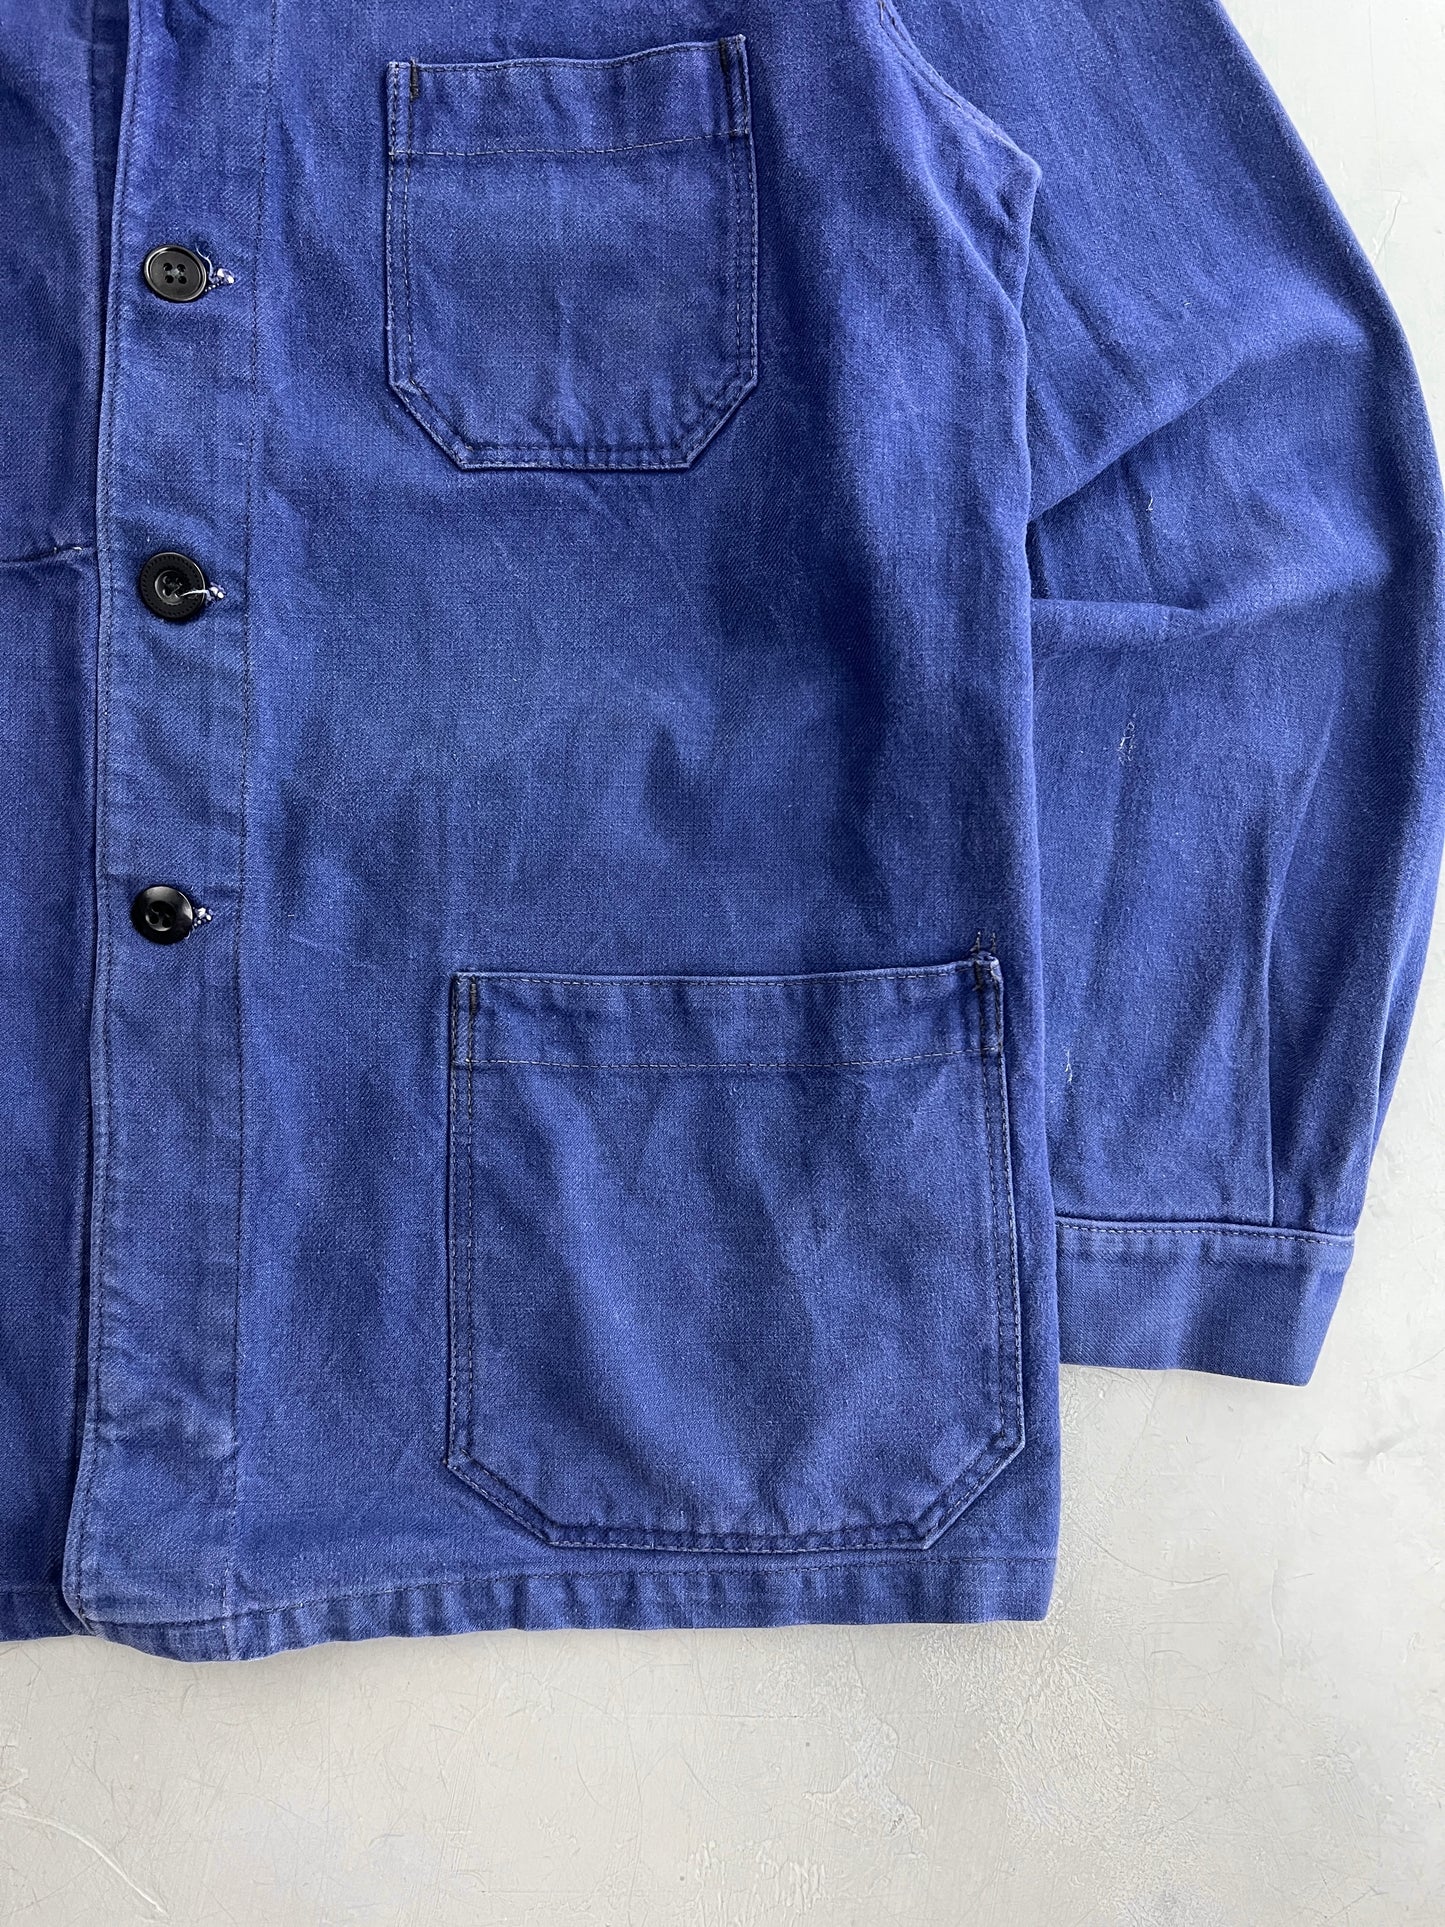 VETRA French Canvas Work Jacket [M/L]